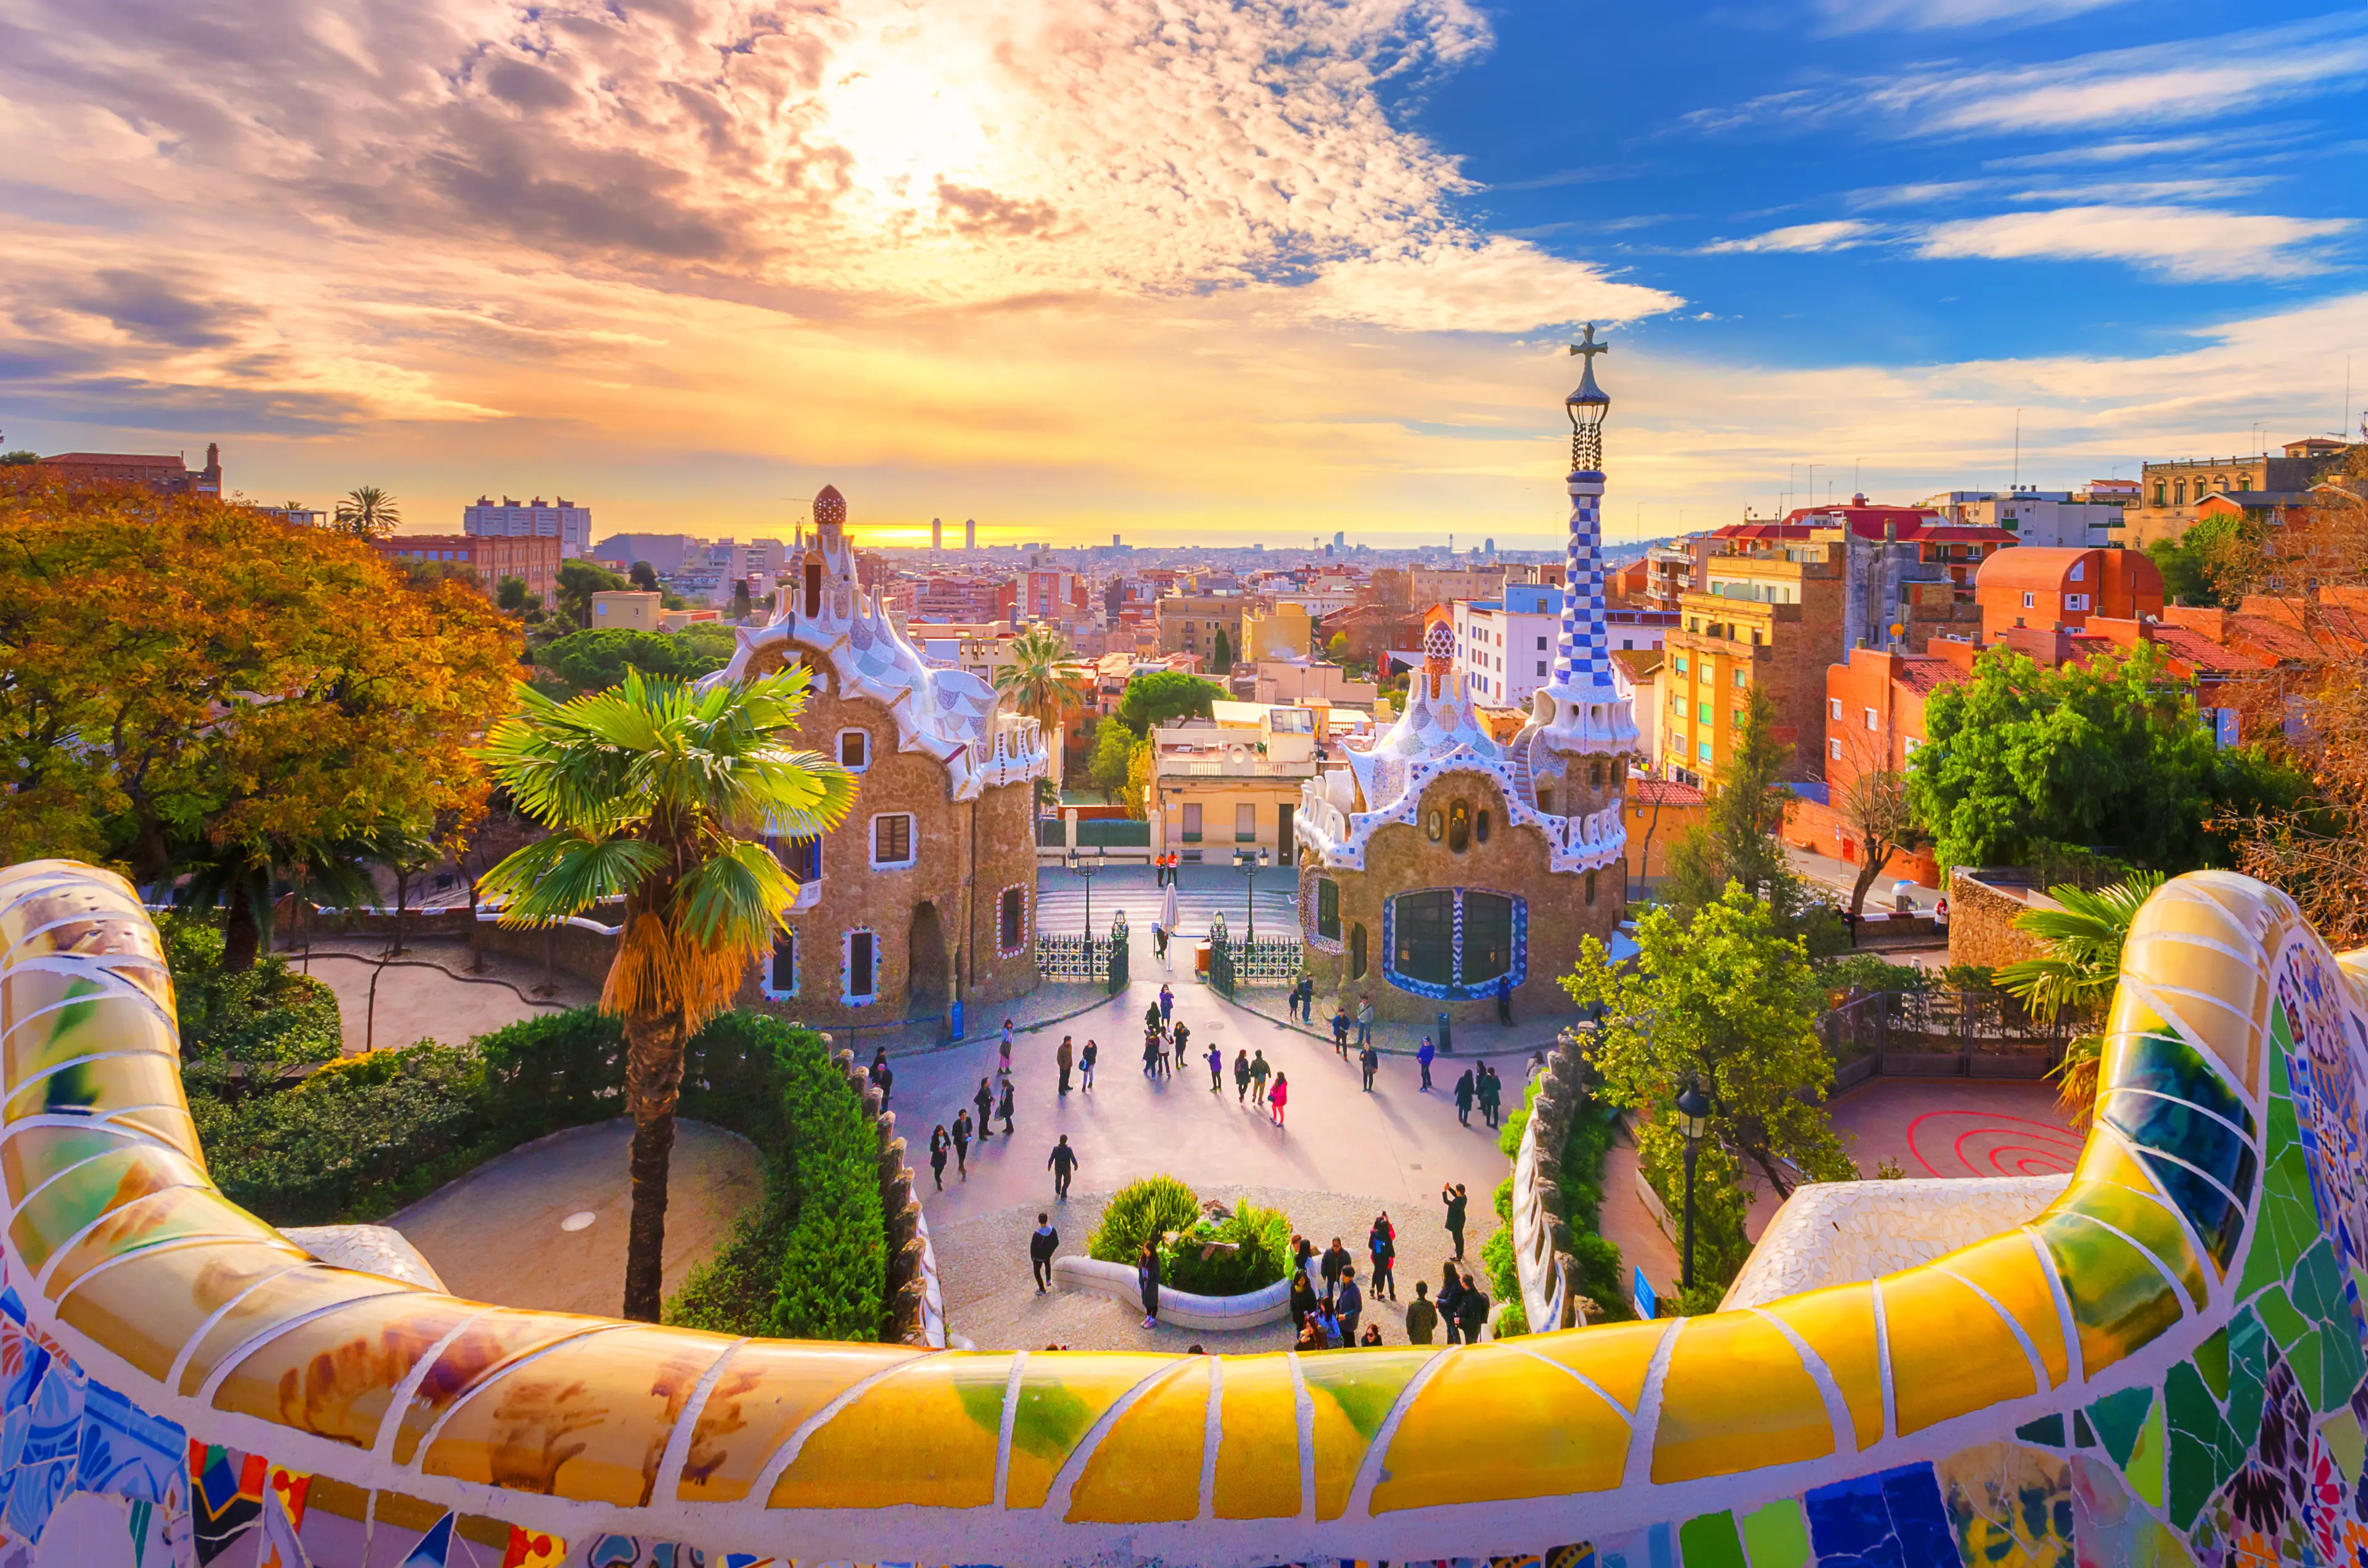 Barcelona, Spain: A Thrilling One-Day Travel Itinerary